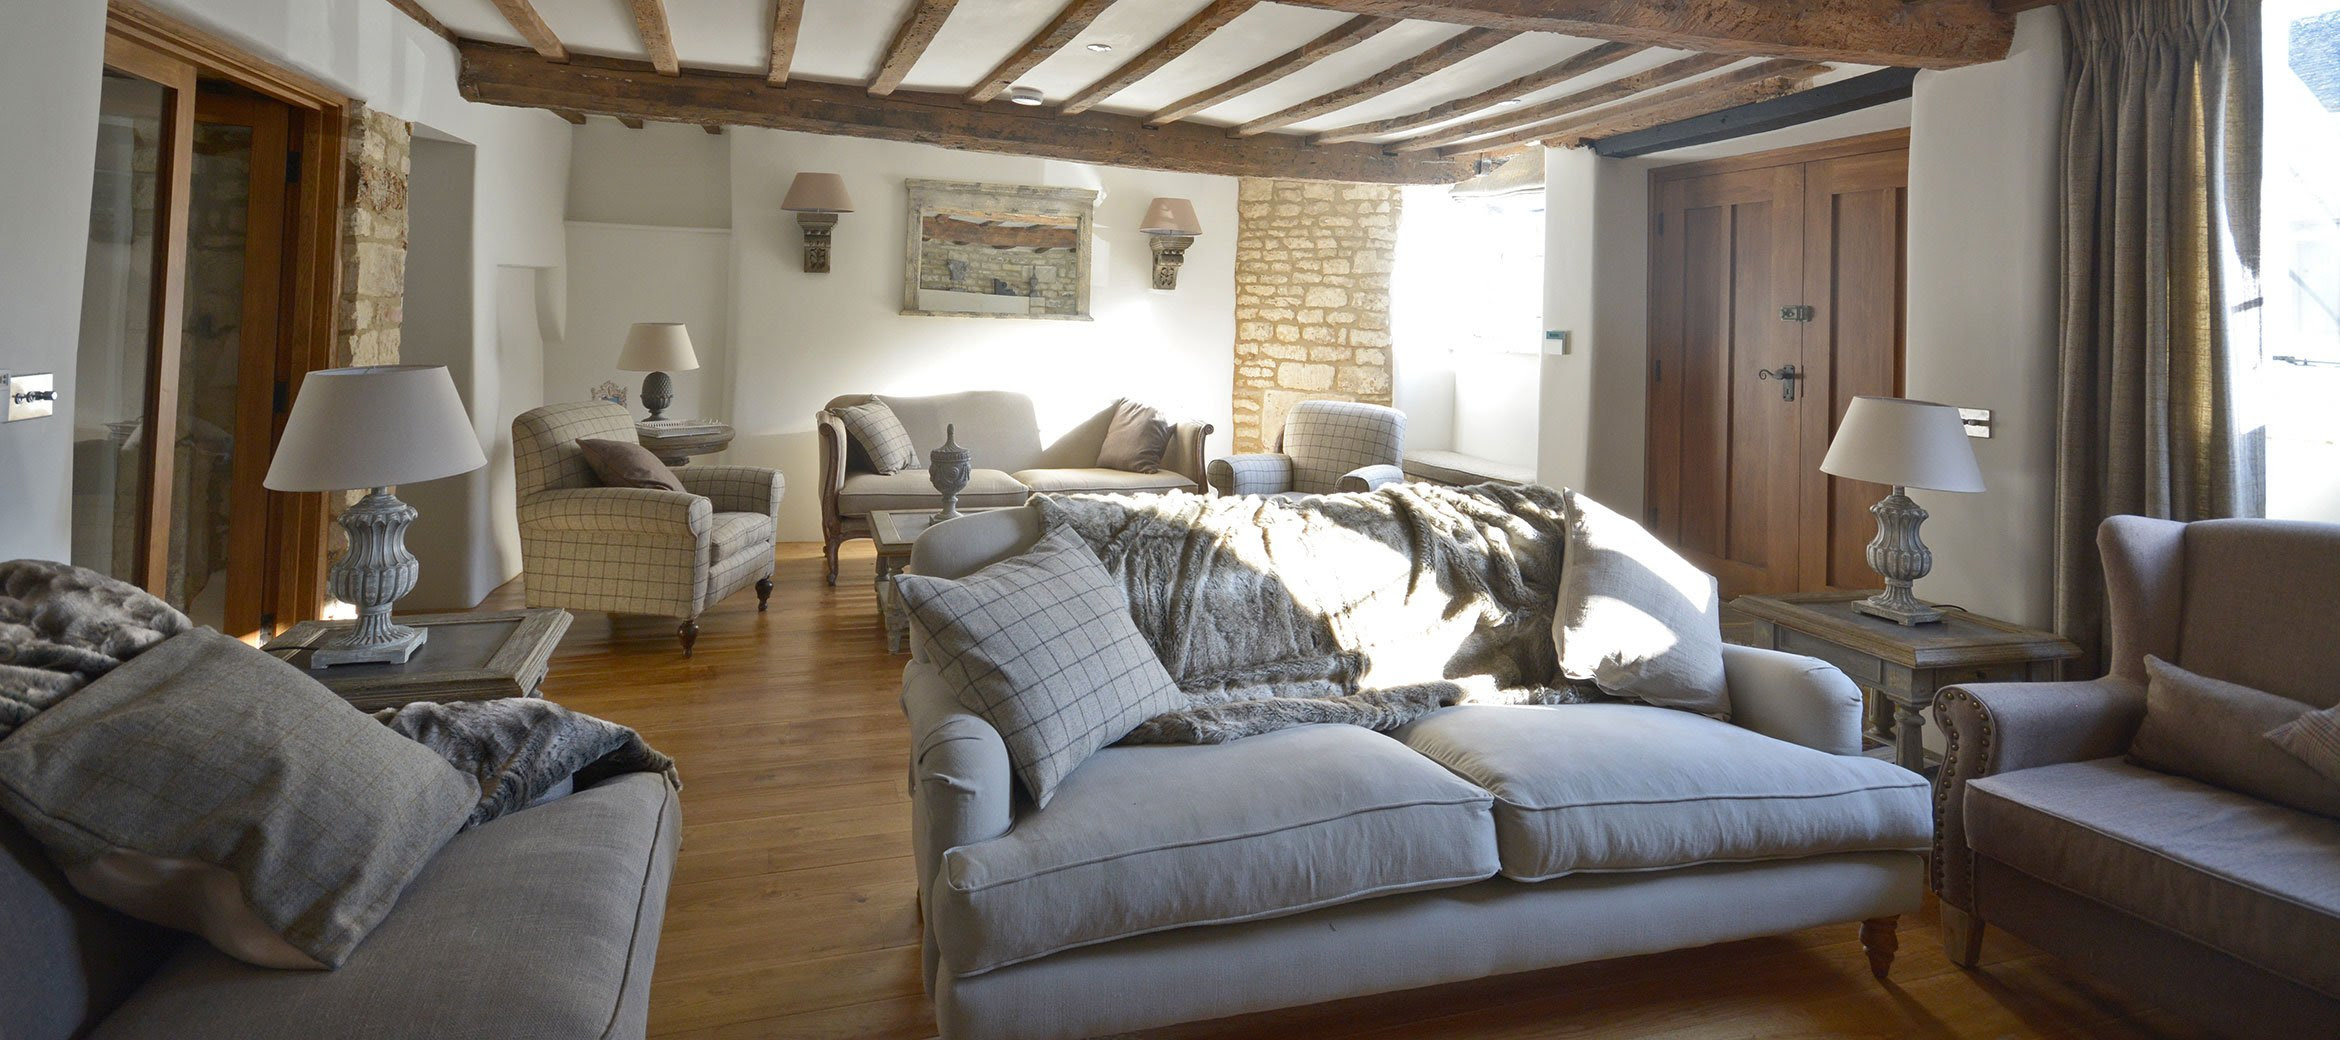 Stunning Cotswold Cottage Living Room Full Home Tour over on Modern Country Style